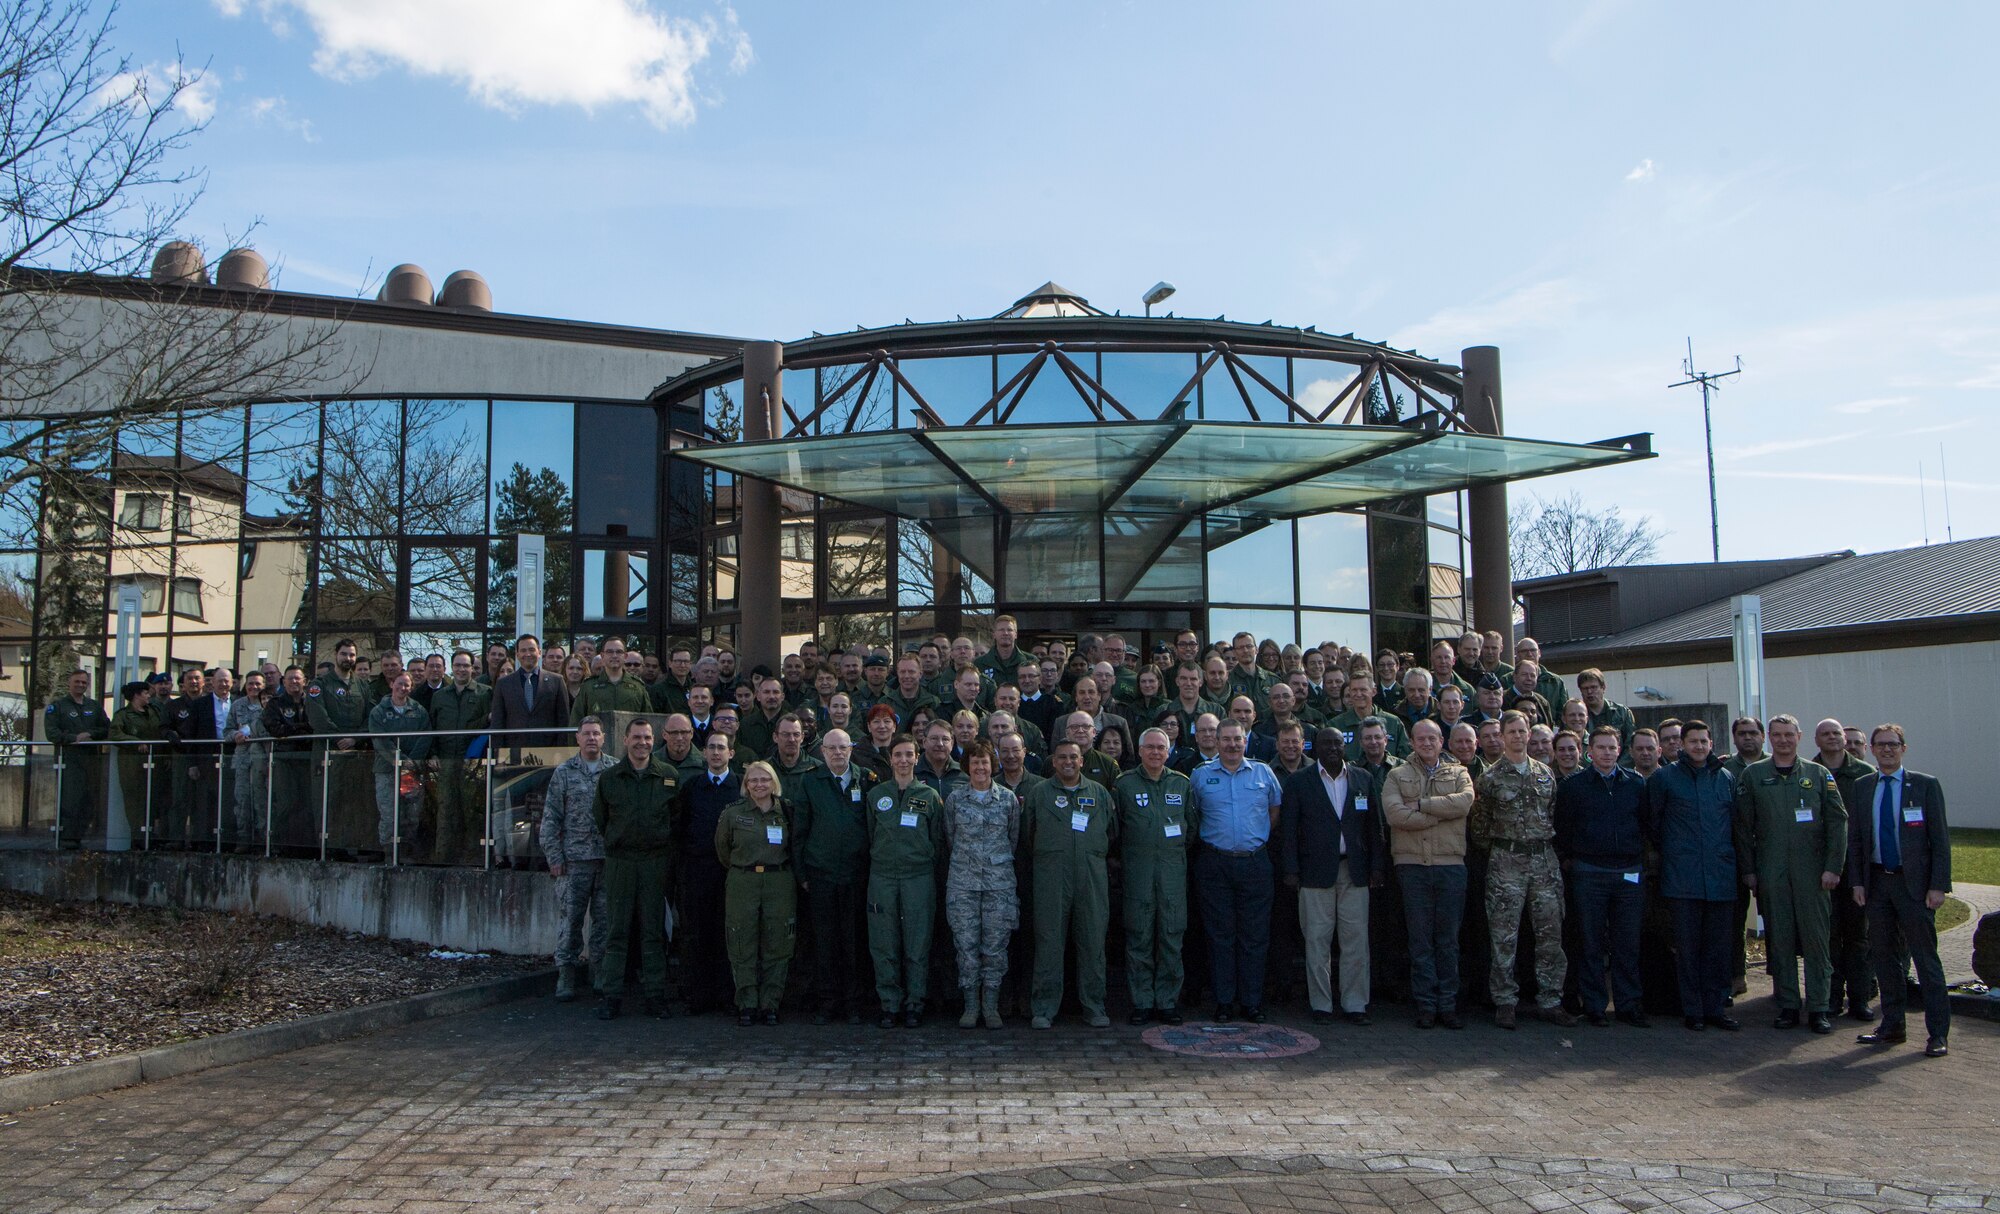 22 NATO and allied partners attended the Ramstein Aerospace Medicine Summit held at Ramstein Air Base, Germany held March 19 to March 23, 2018.
TAGS: NATO, Ramstein, Ramstein Air Base, RAB, RAMS, STO, medicine, aerospace medicine, Ramstein Aerospace Medicine Summit, Germany